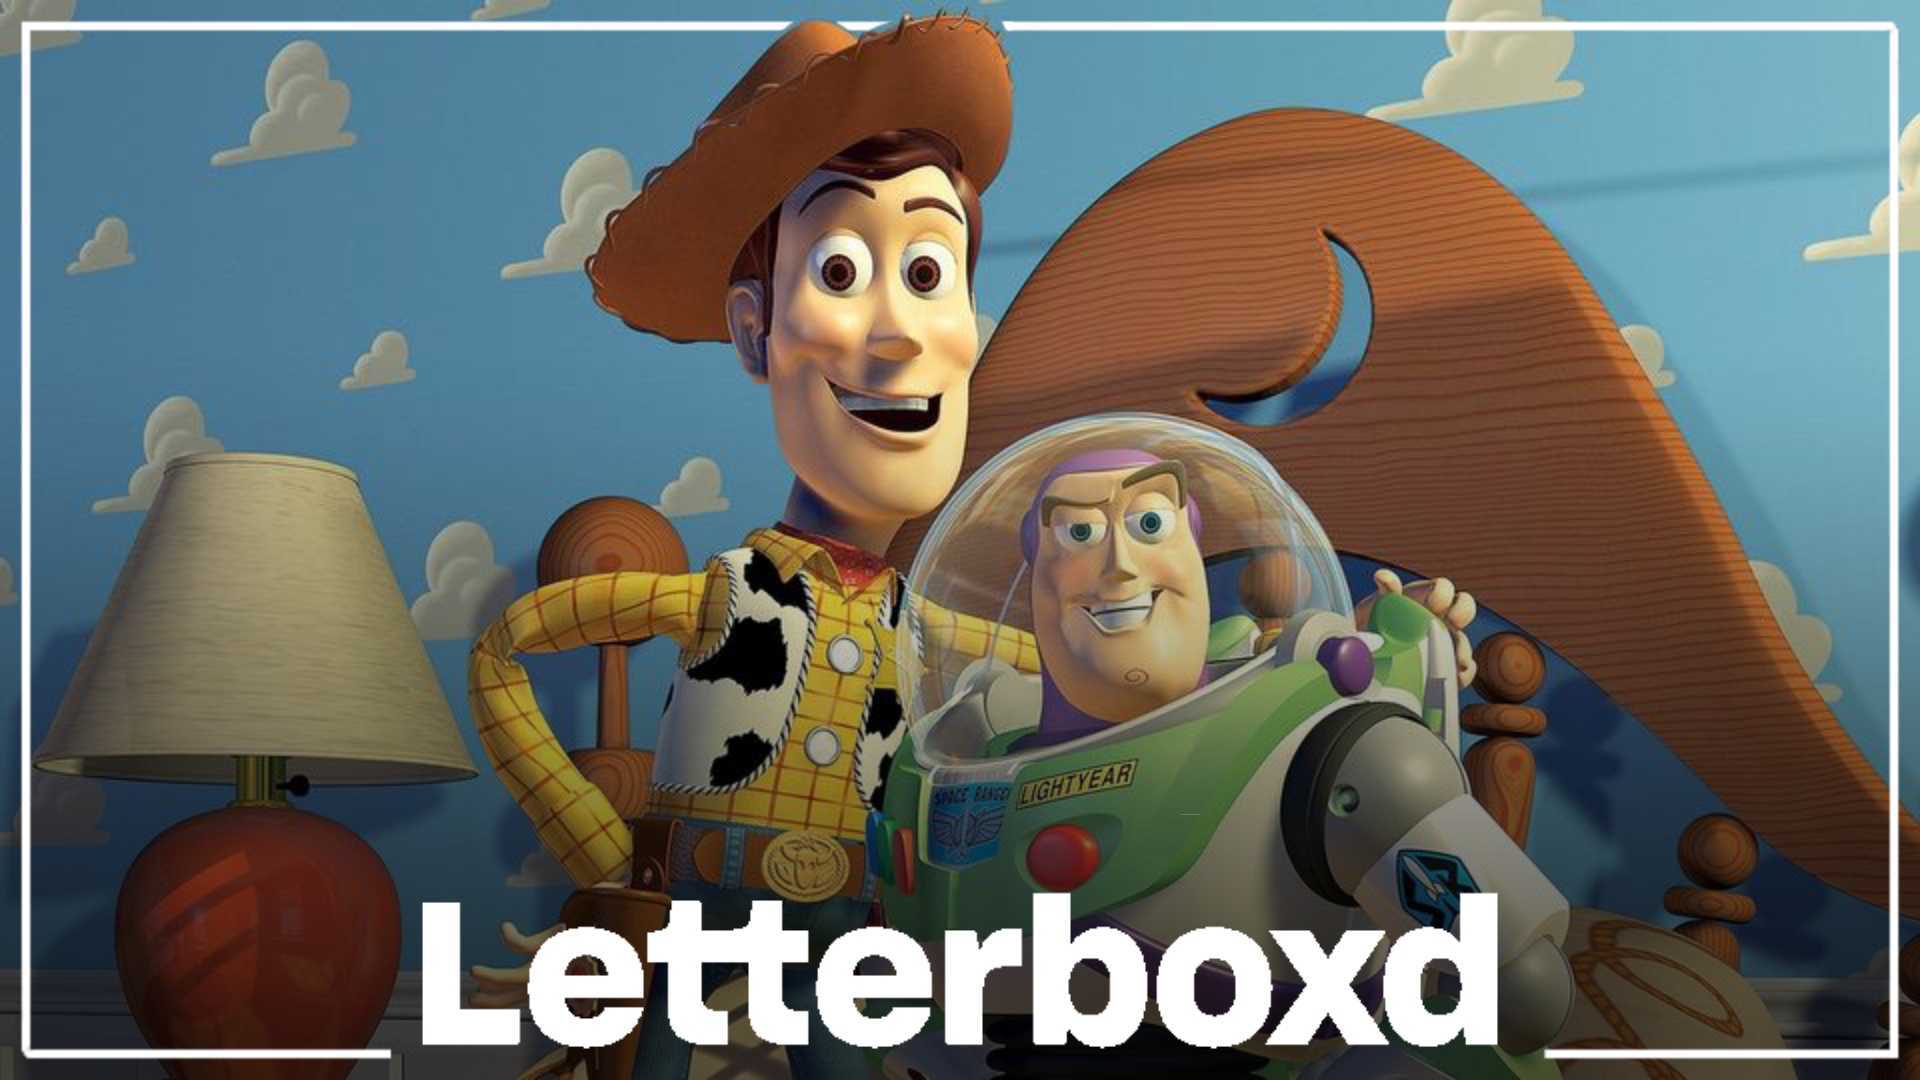 ‘Toy Story’ Joins the Letterboxd One Million Watched Club!